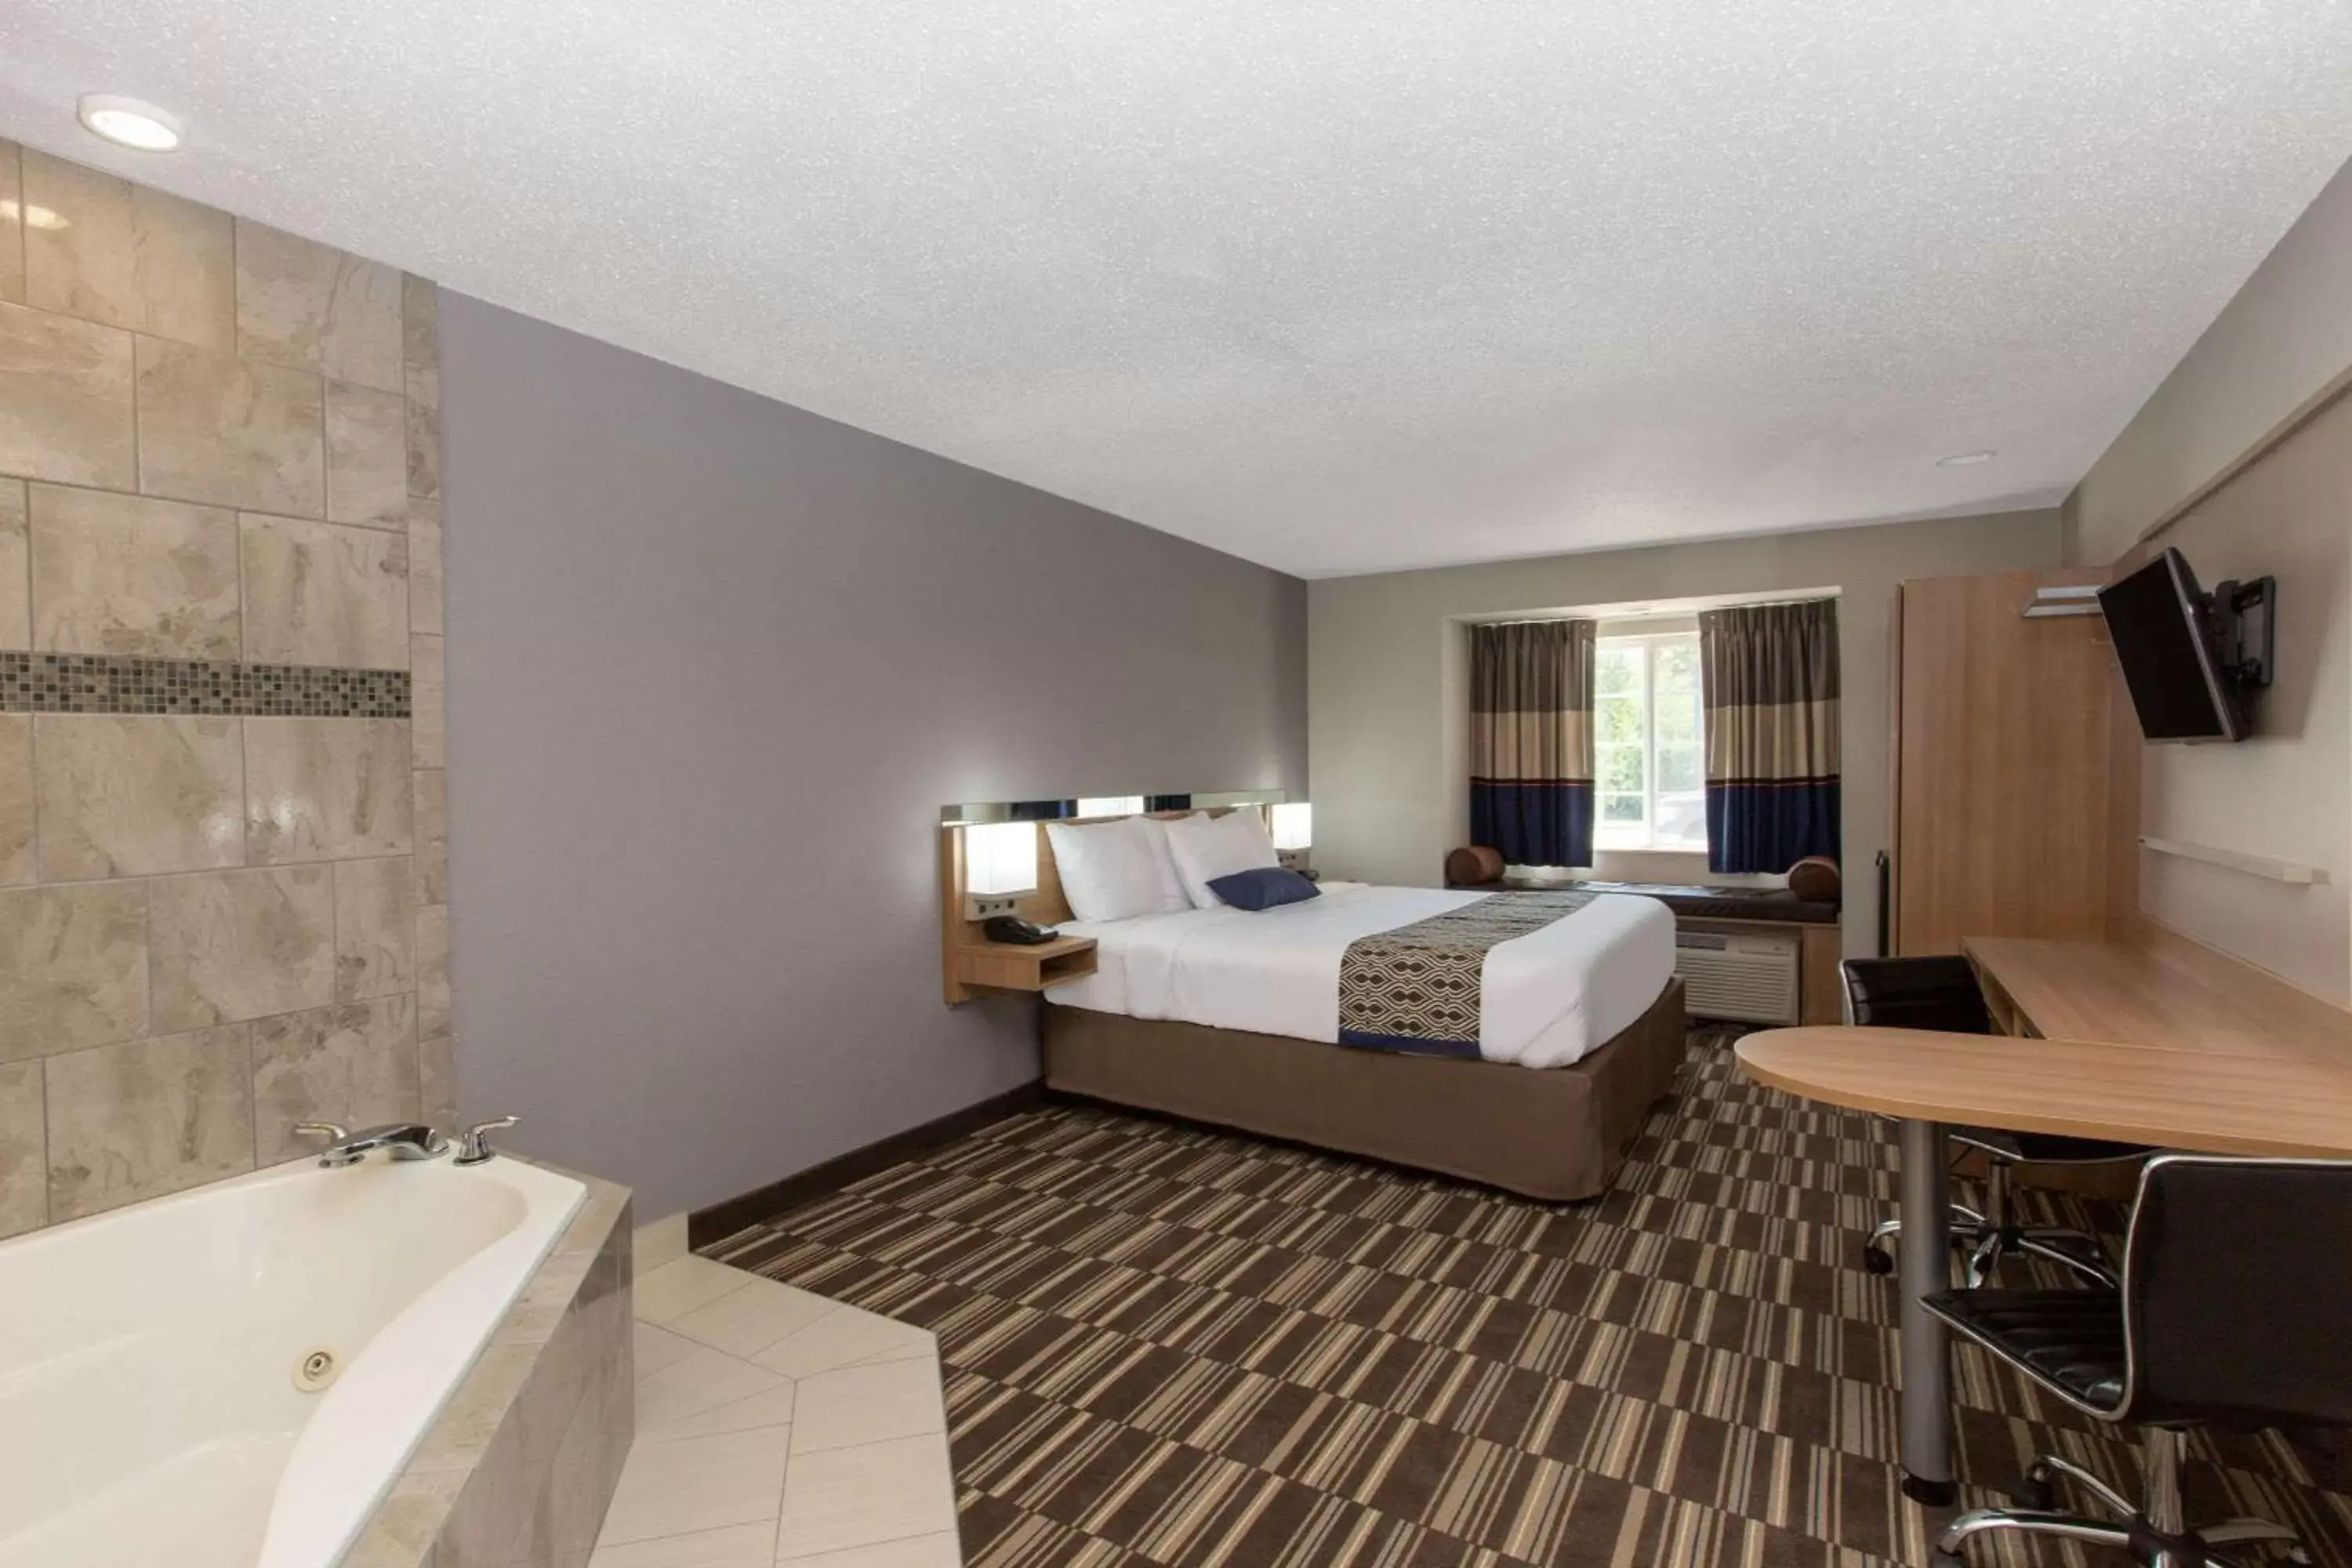 Photo of the whole room in Microtel Inn & Suites by Wyndham Augusta/Riverwatch